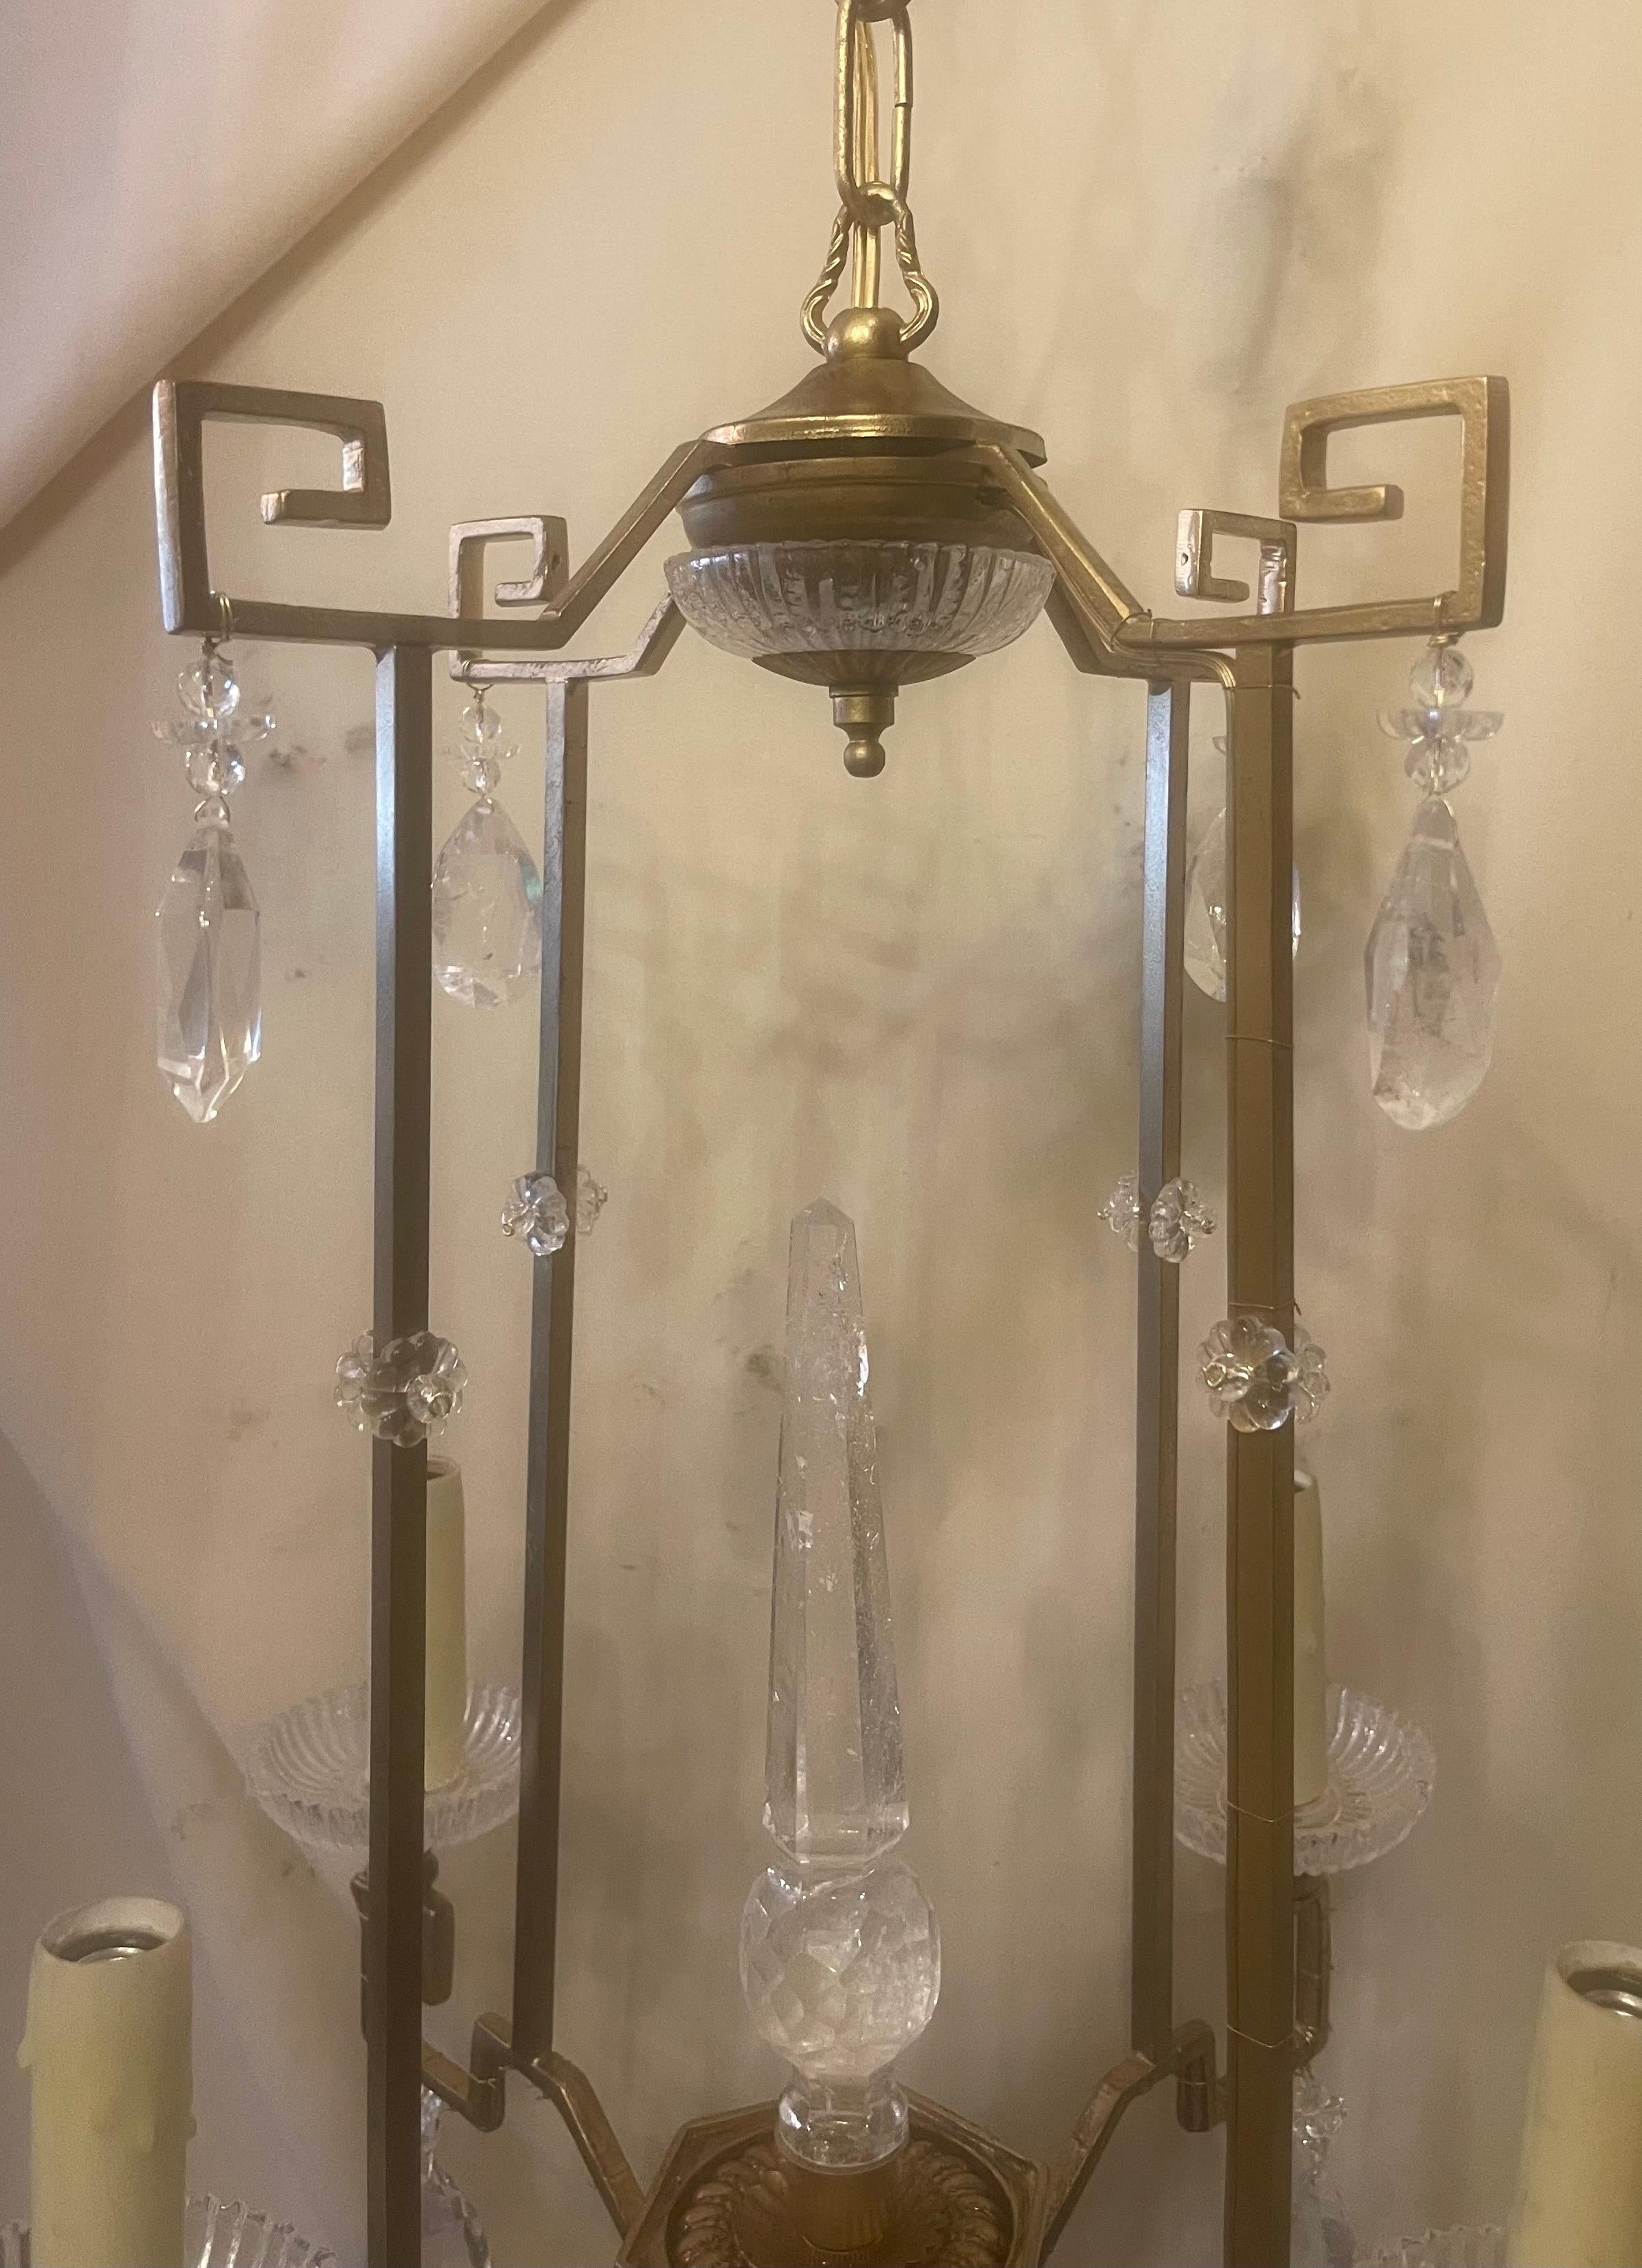 A Wonderful Rock Crystal Drop Gold Gilt Chinoiserie / Pagoda Lantern Form Chandelier Having 4 Candelabra Lights, Completely Rewired With New Sockets.
Accompanied By Chain And Canopy